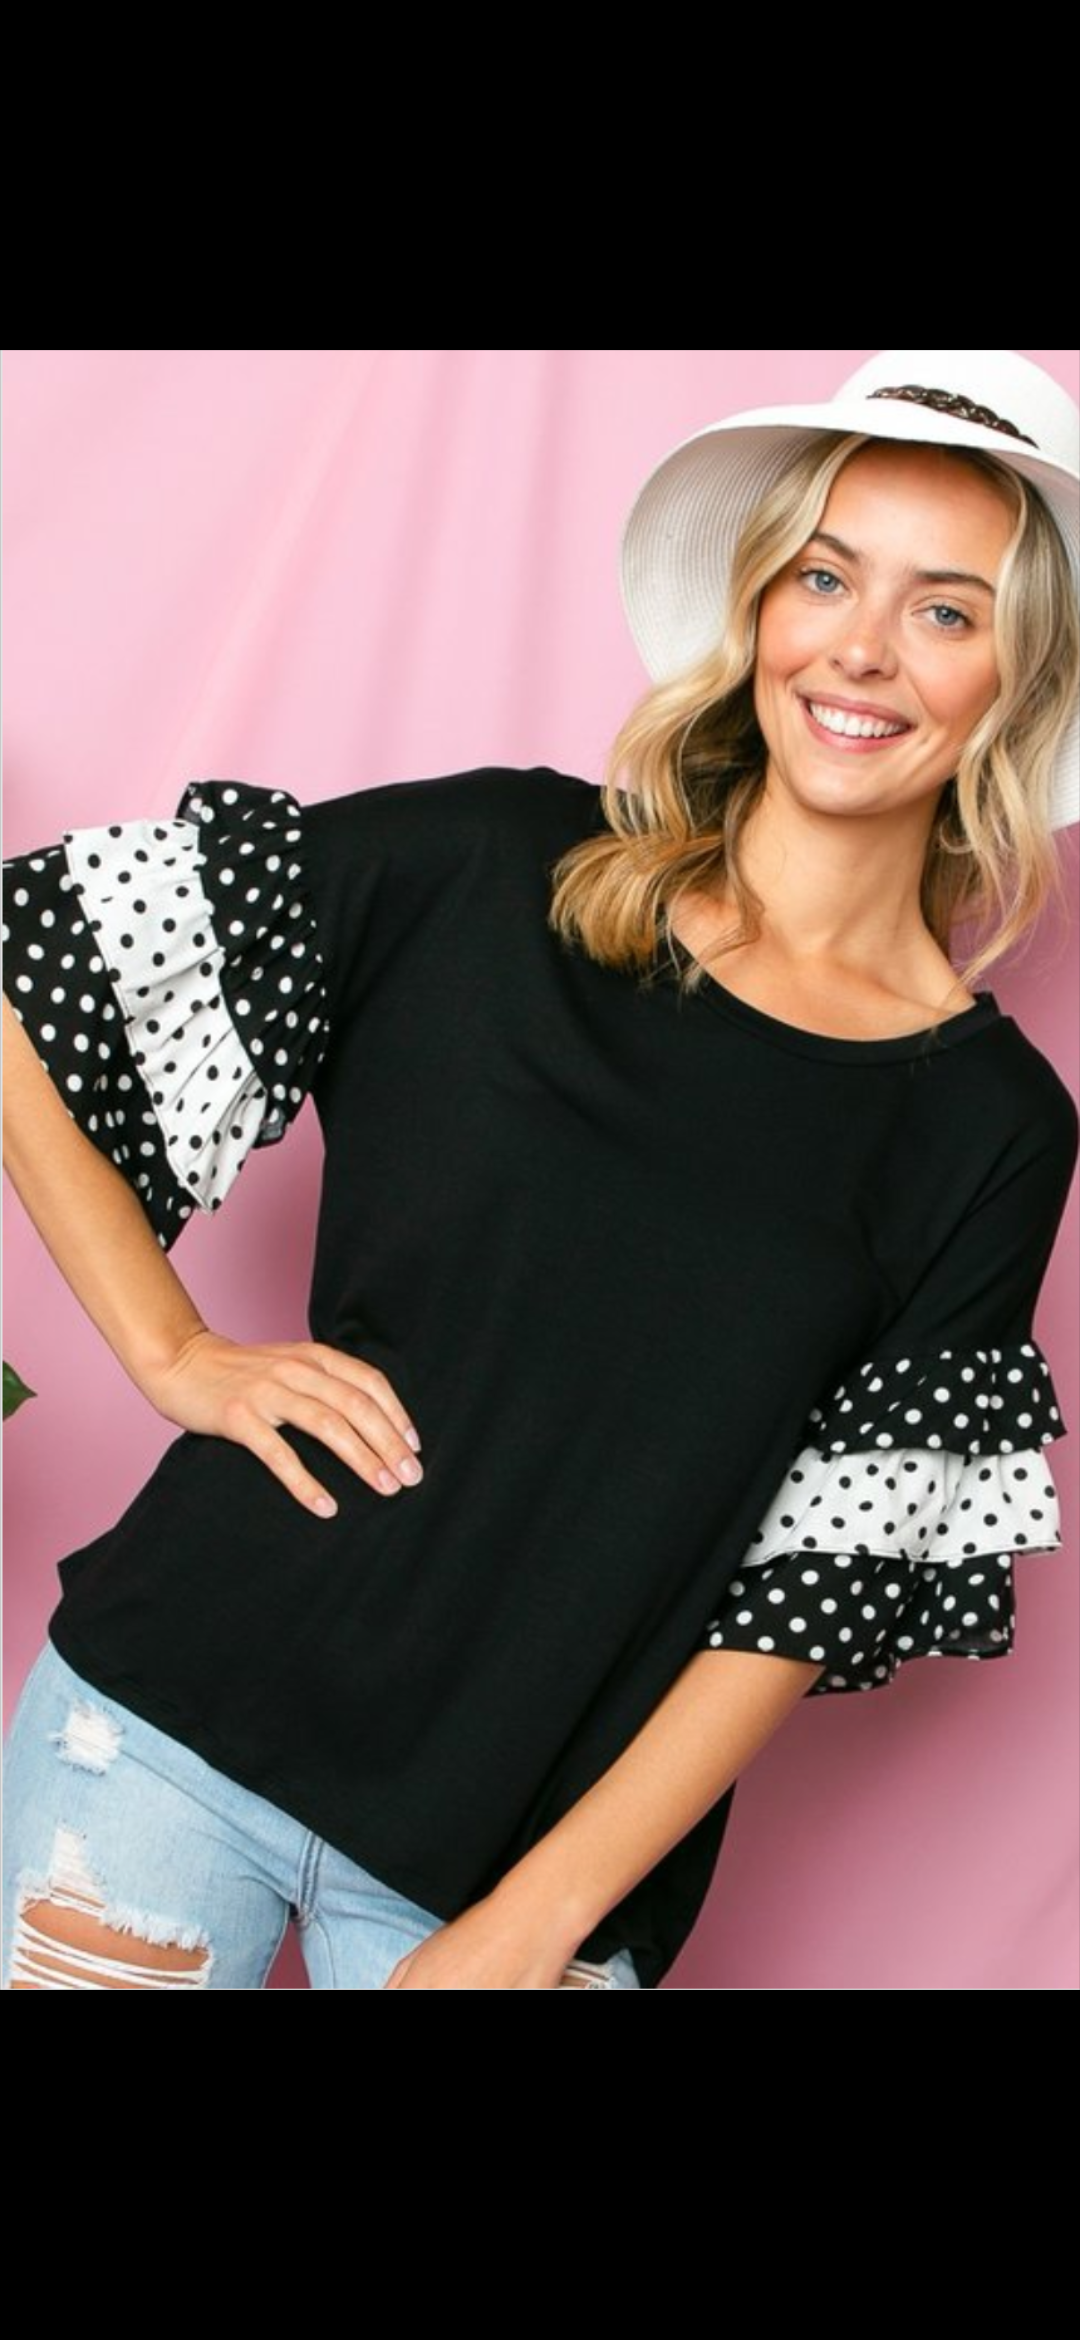 SOLID BLACK JERSEY AND POLKA DOT PRINT WOVEN MIXED TIERED RUFFLE HALF SLEEVE ROUND NECK TOP